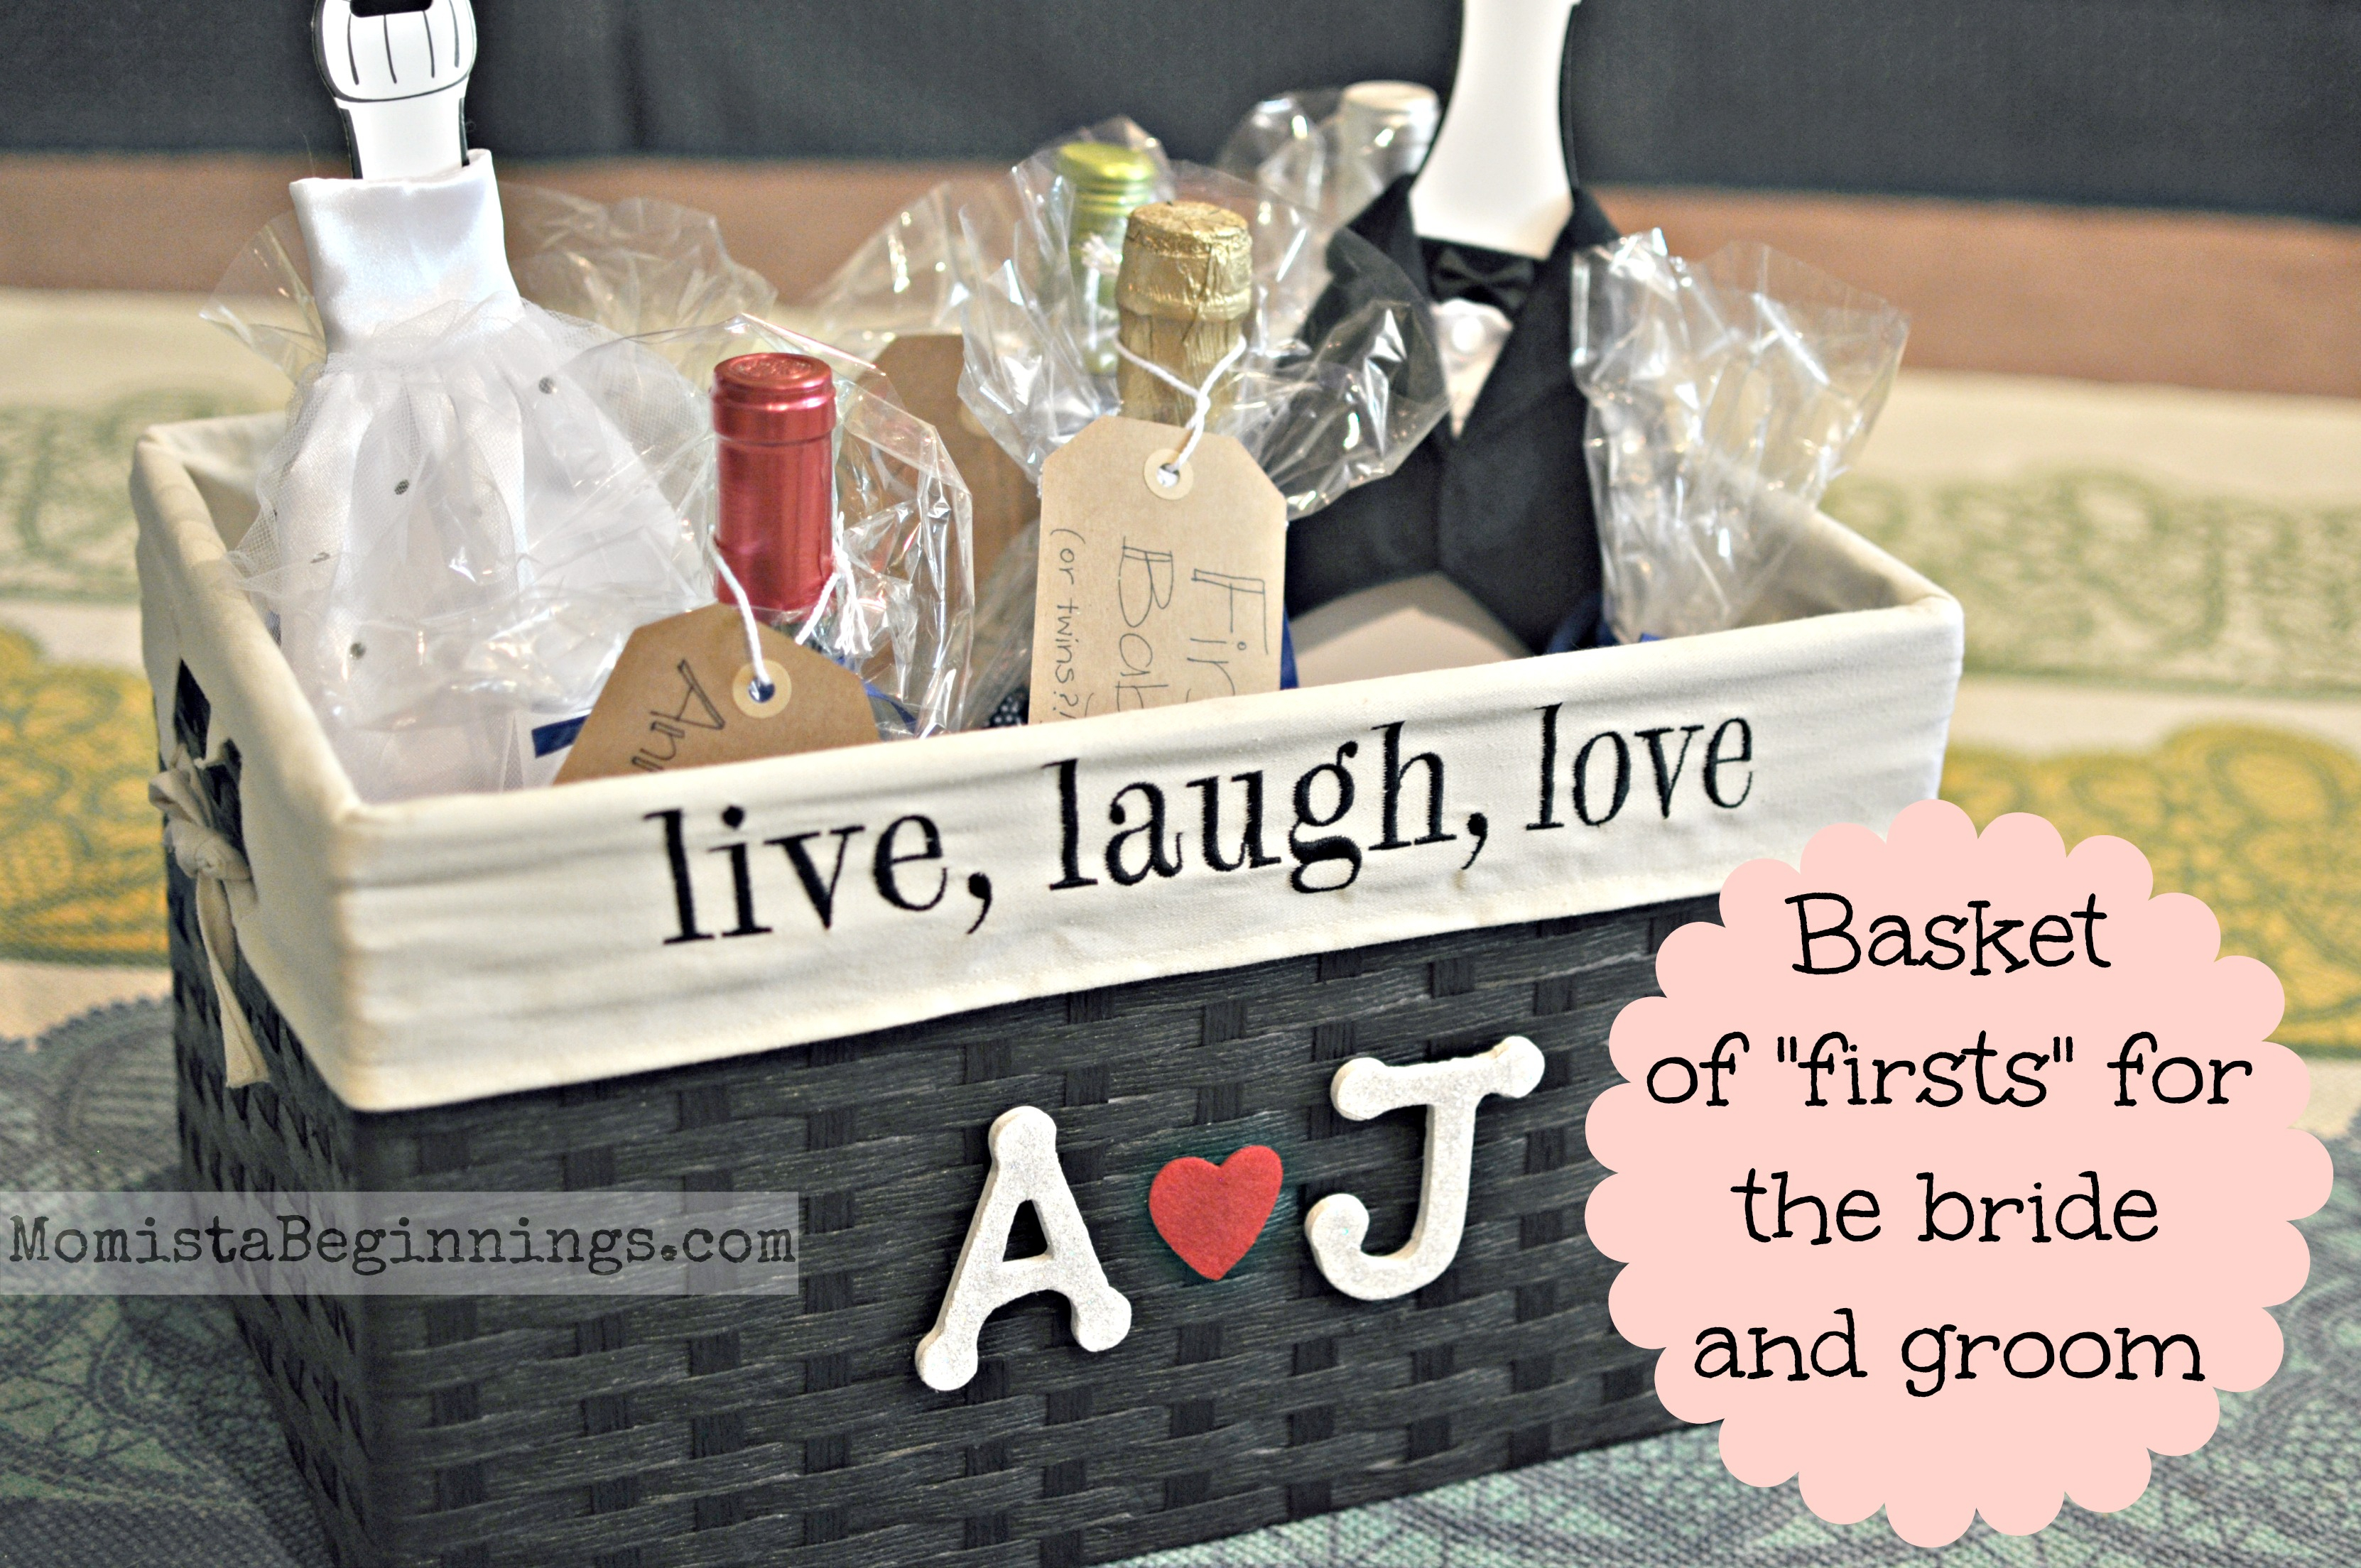 10 Lovable Groom Gifts From Bride Ideas basket of firsts for the bride and groom diy momista beginnings 3 2024